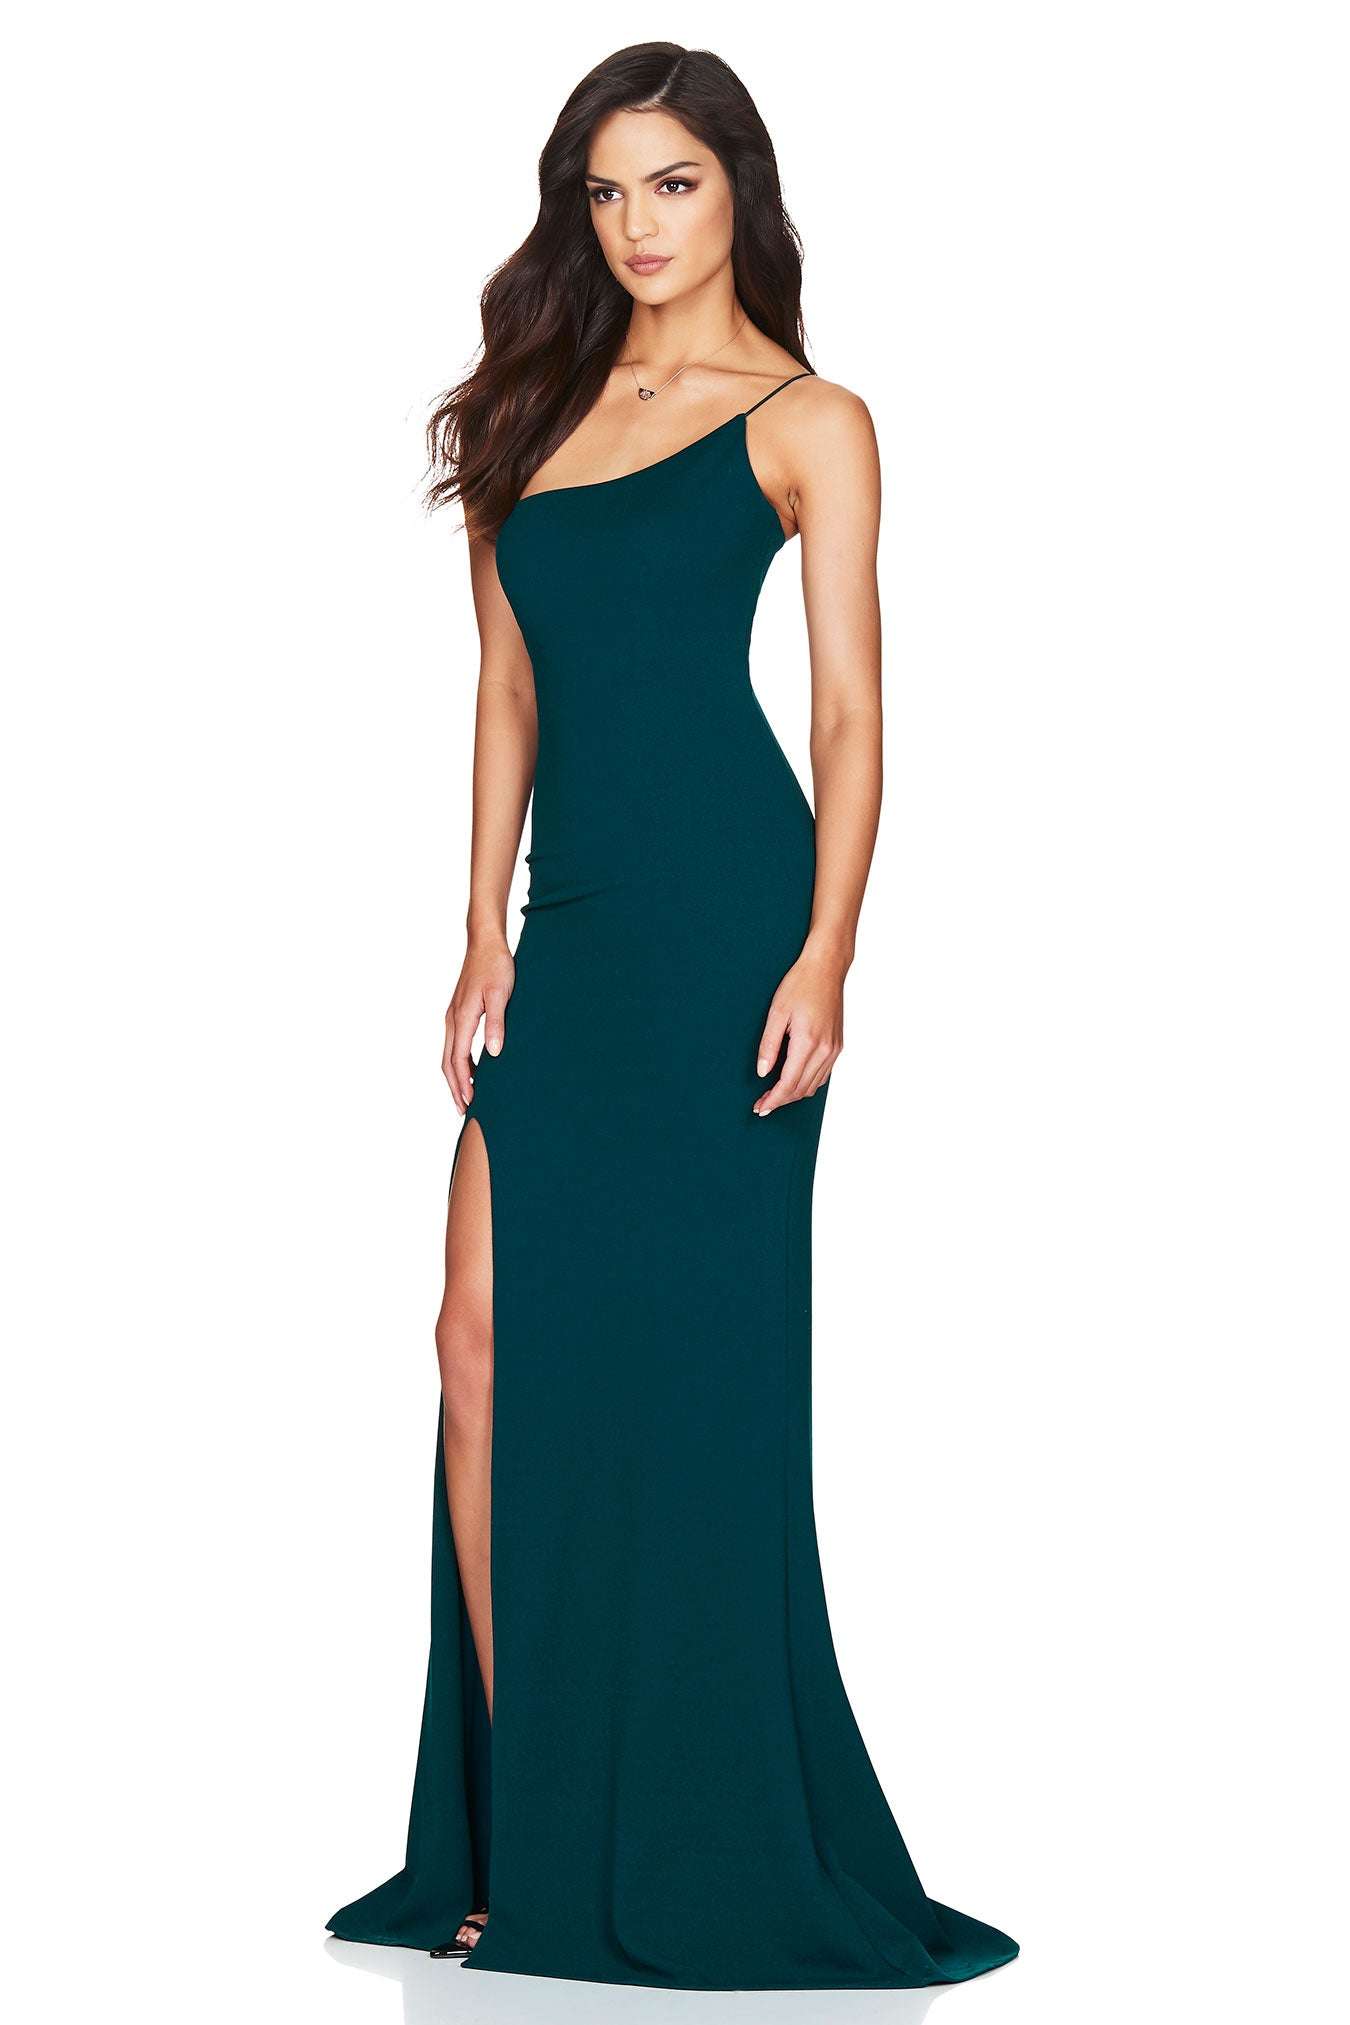 Nookie BUY IT NOOKIE Jasmine One Shoulder Gown (Teal) - nookie-jasmine-one-shoulder-gown-teal---rrp-9-dress-for-a-night-30755566_a4527912-c433-4fa3-b1f9-29e7a26ed3e9.jpg